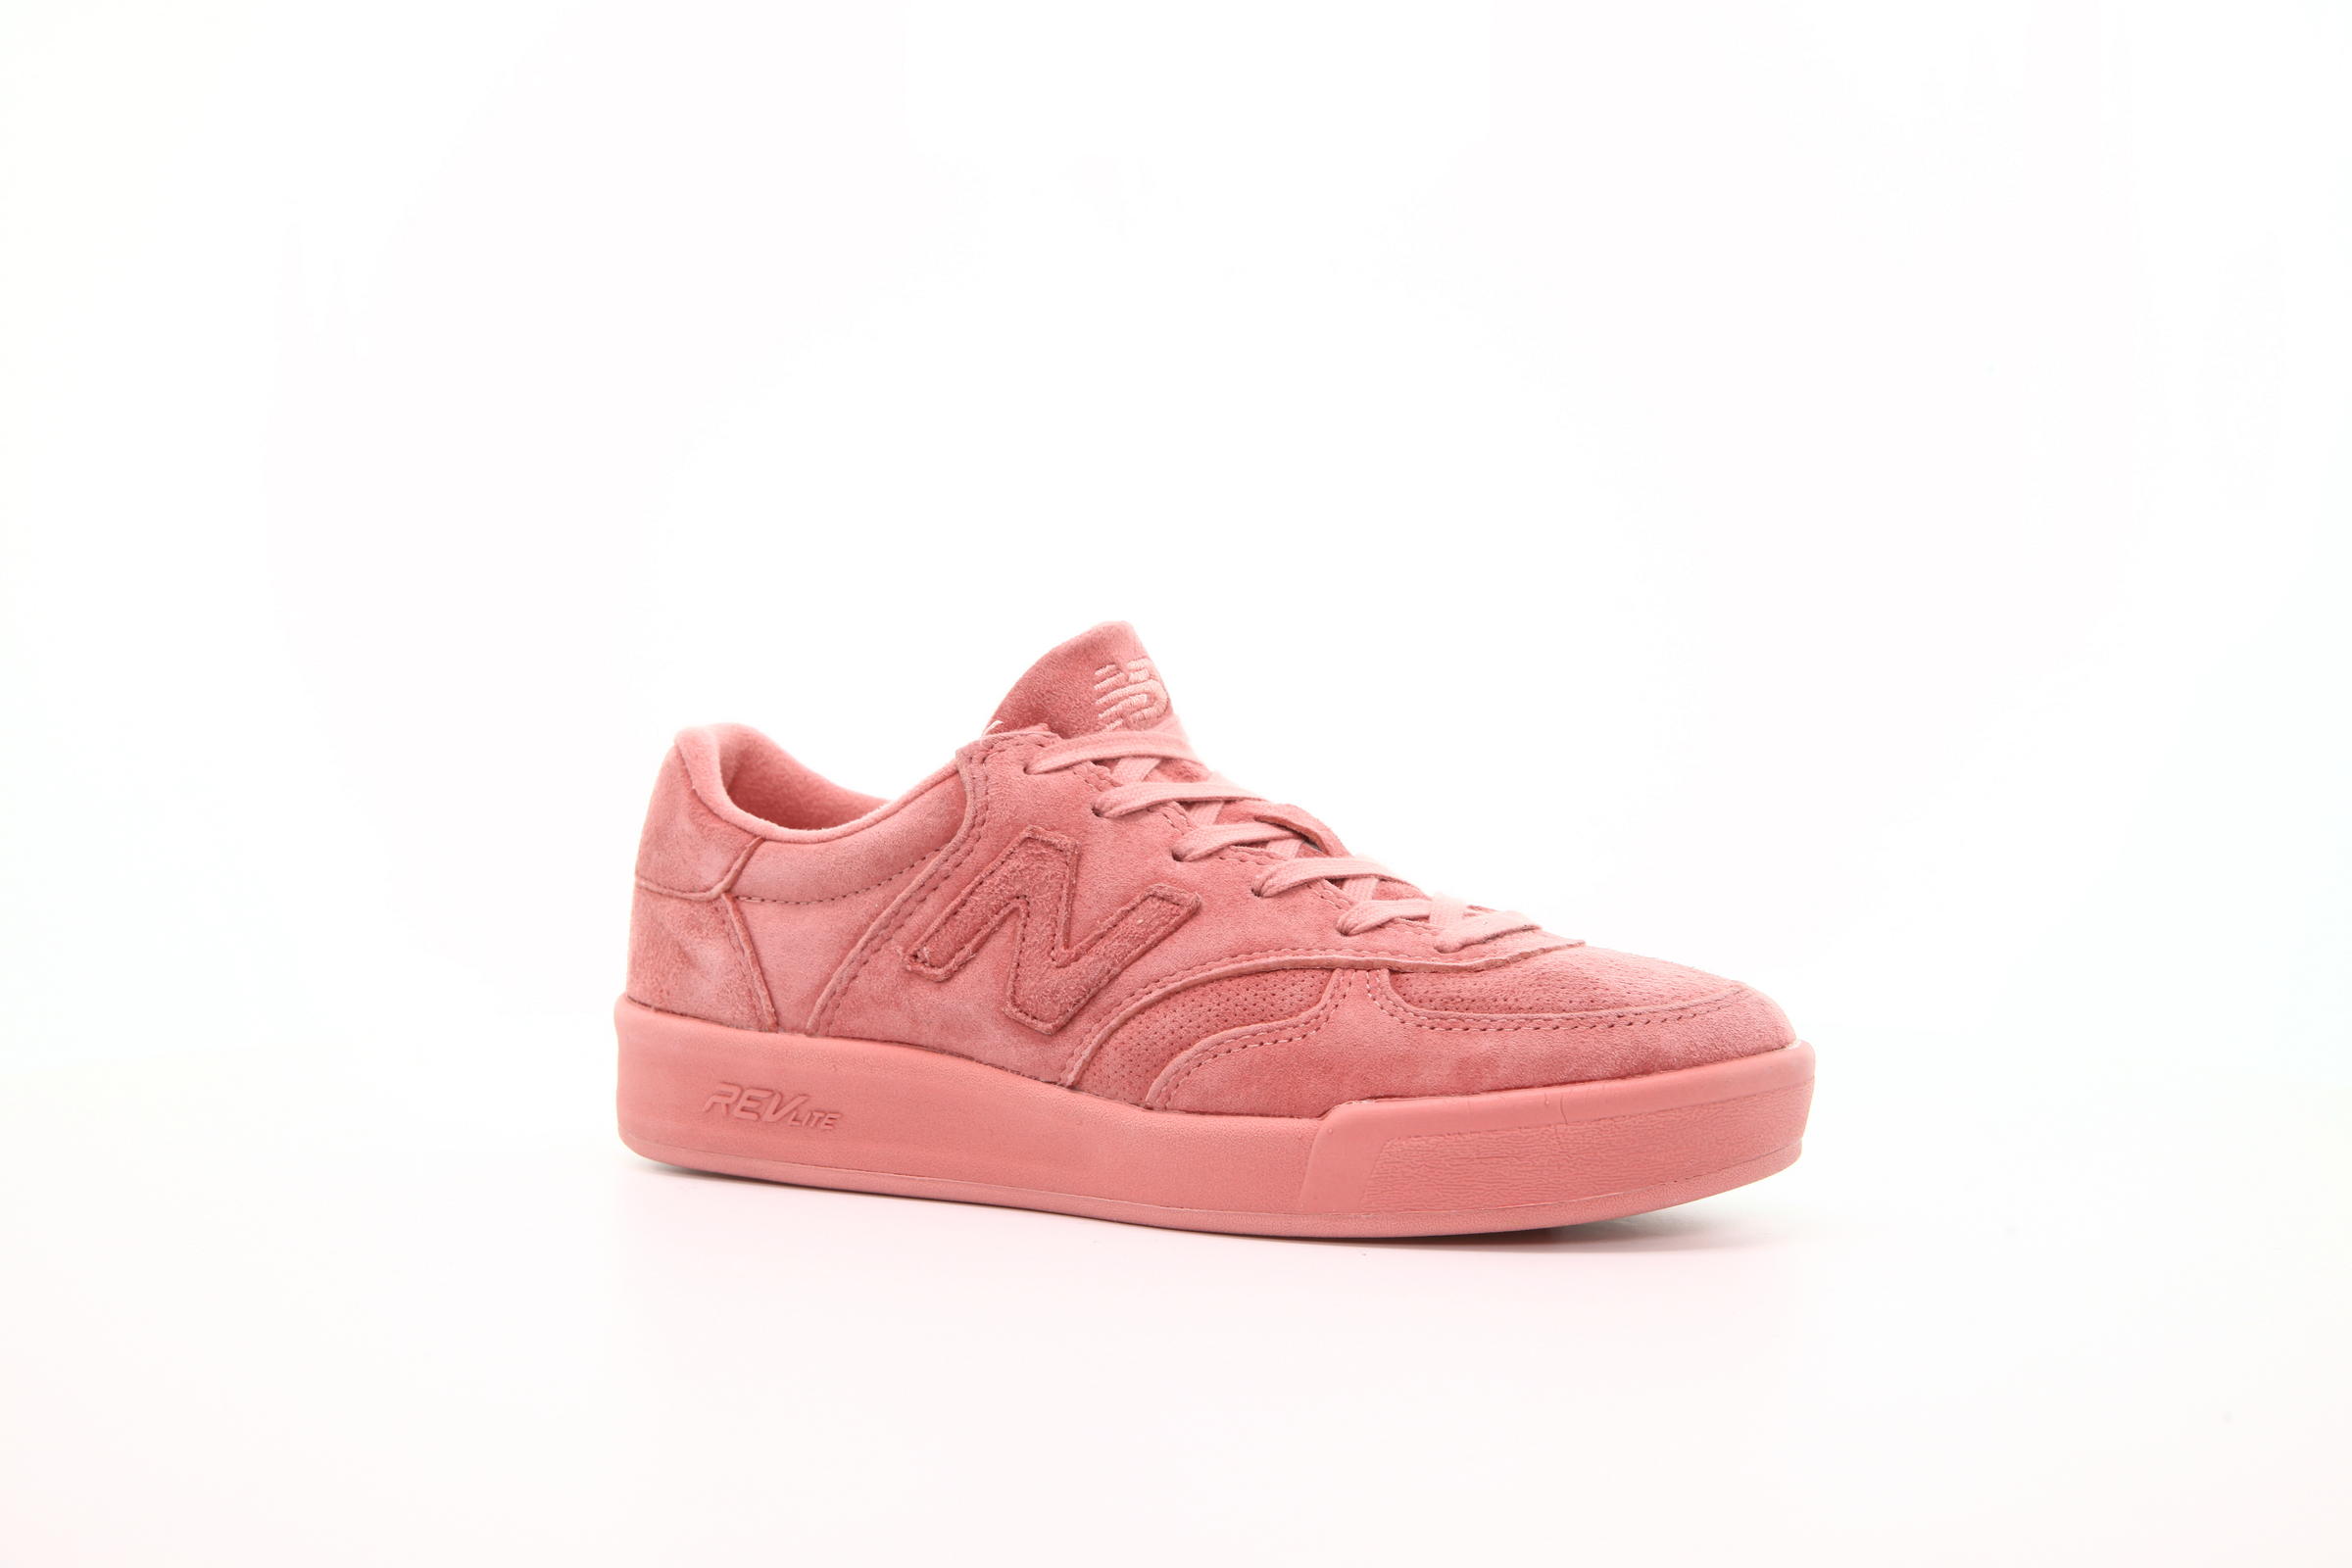 New Balance WRT 300 PP "Dusted Peach"